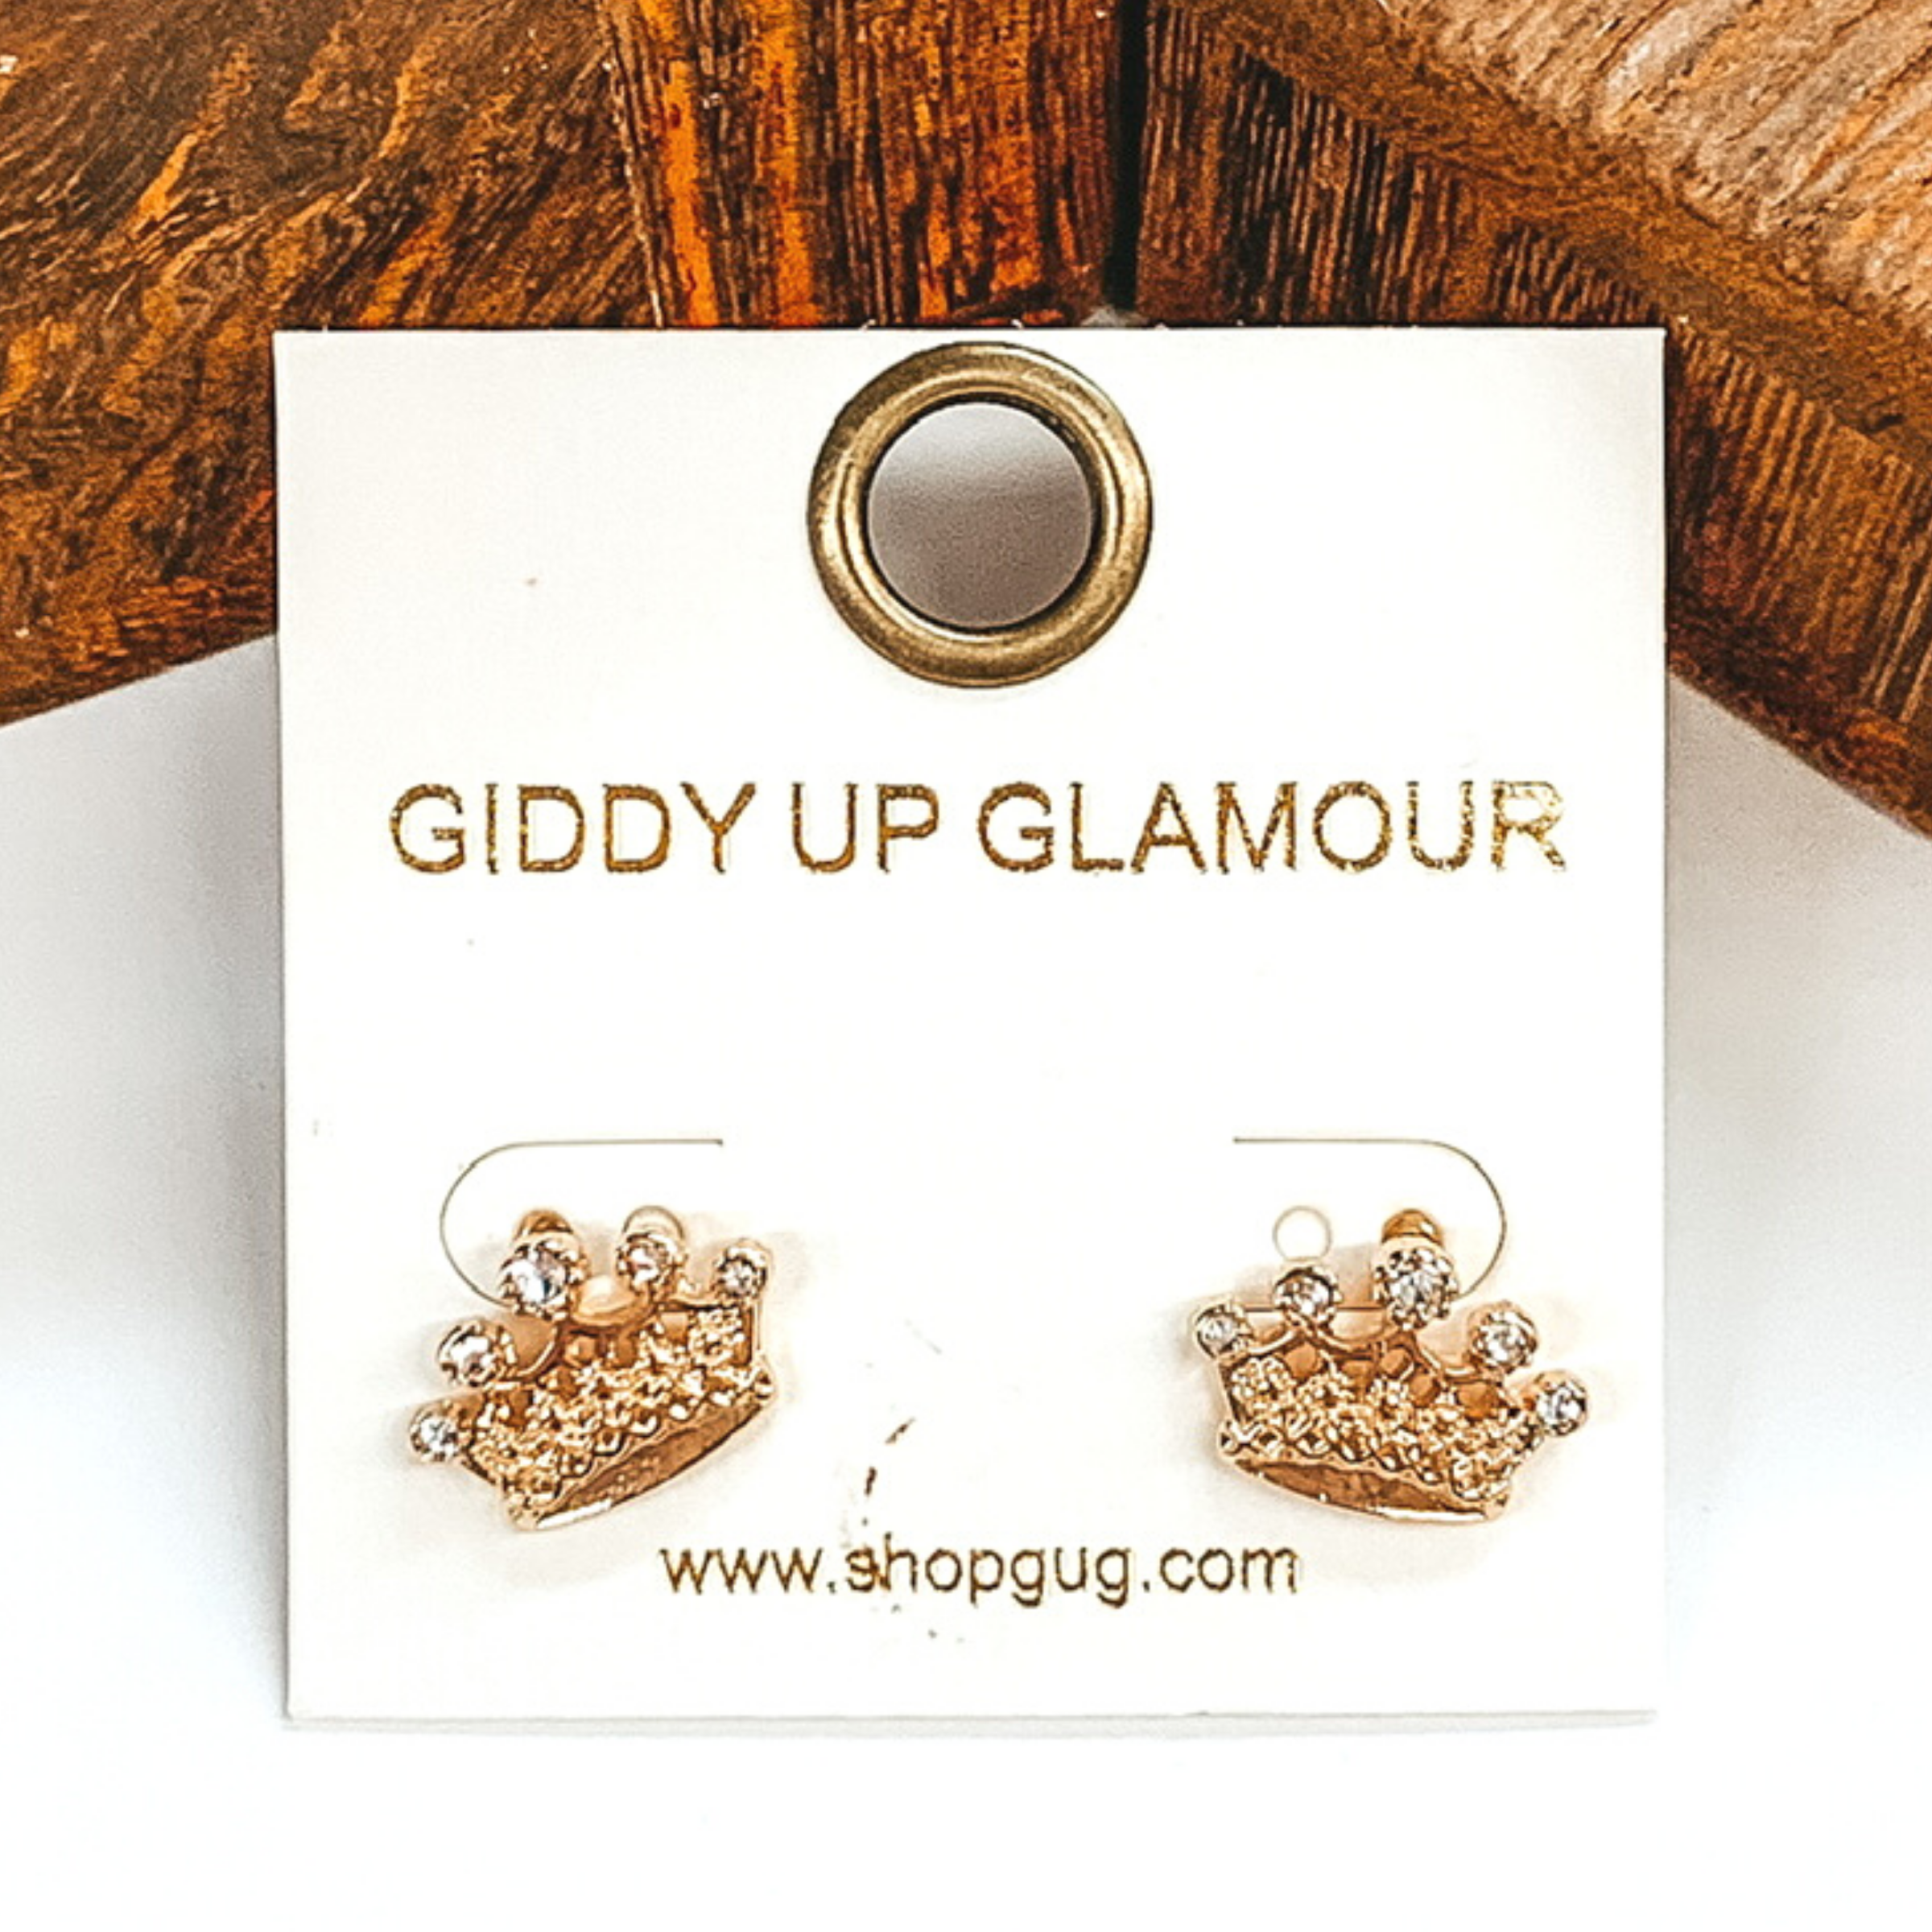 Gold crown stud earrings with clear crystals. These earrings are pictured on a white and brown background.